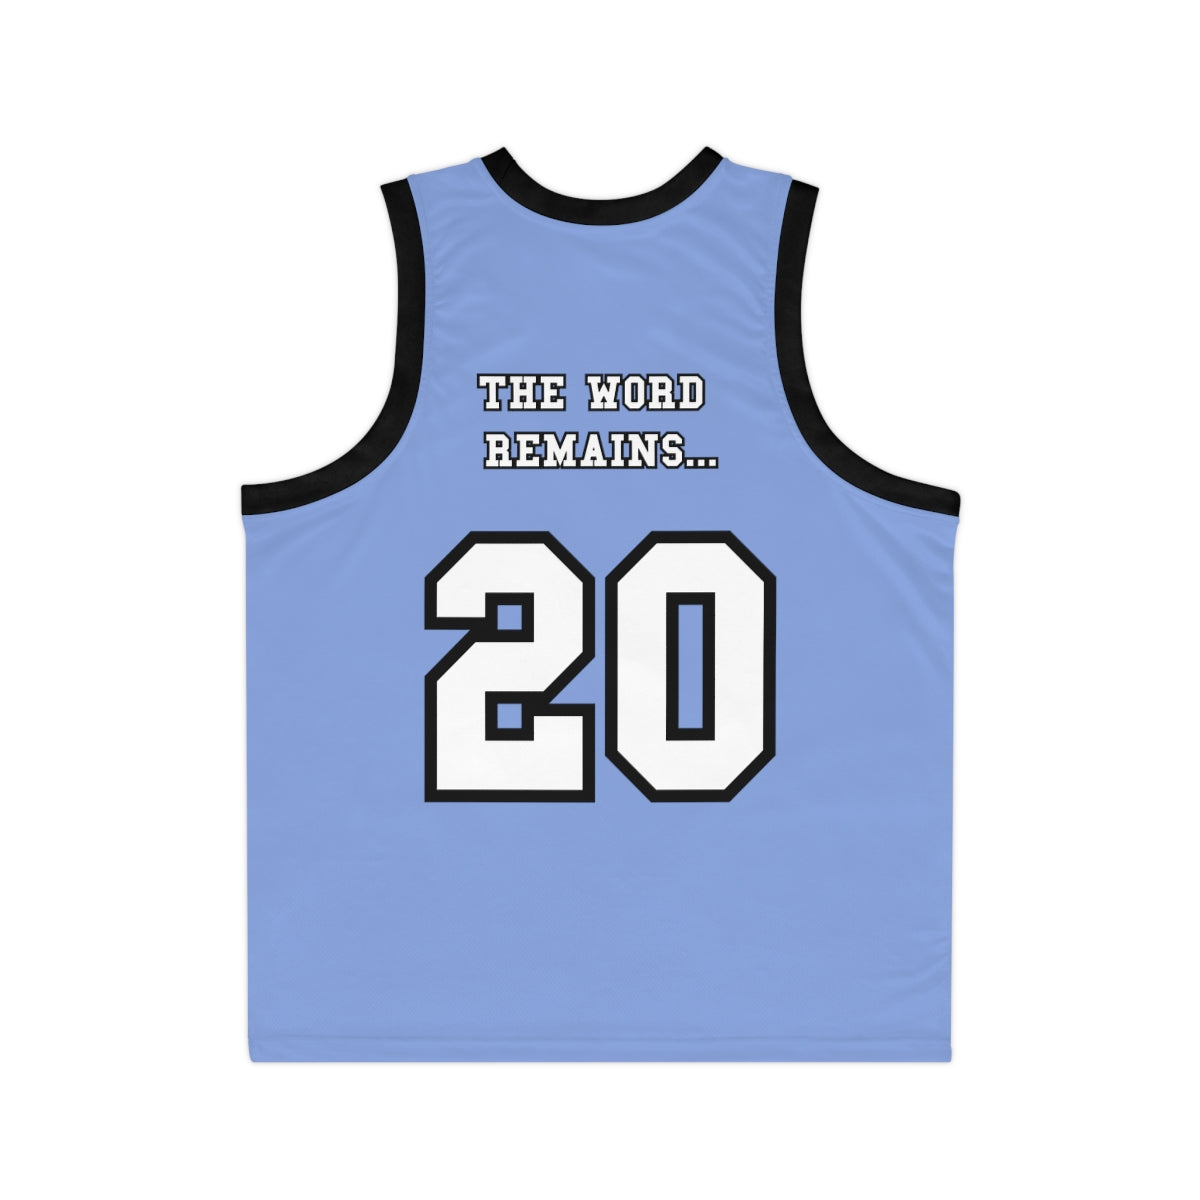 The Word Remains (Swingman) Basketball Jersey